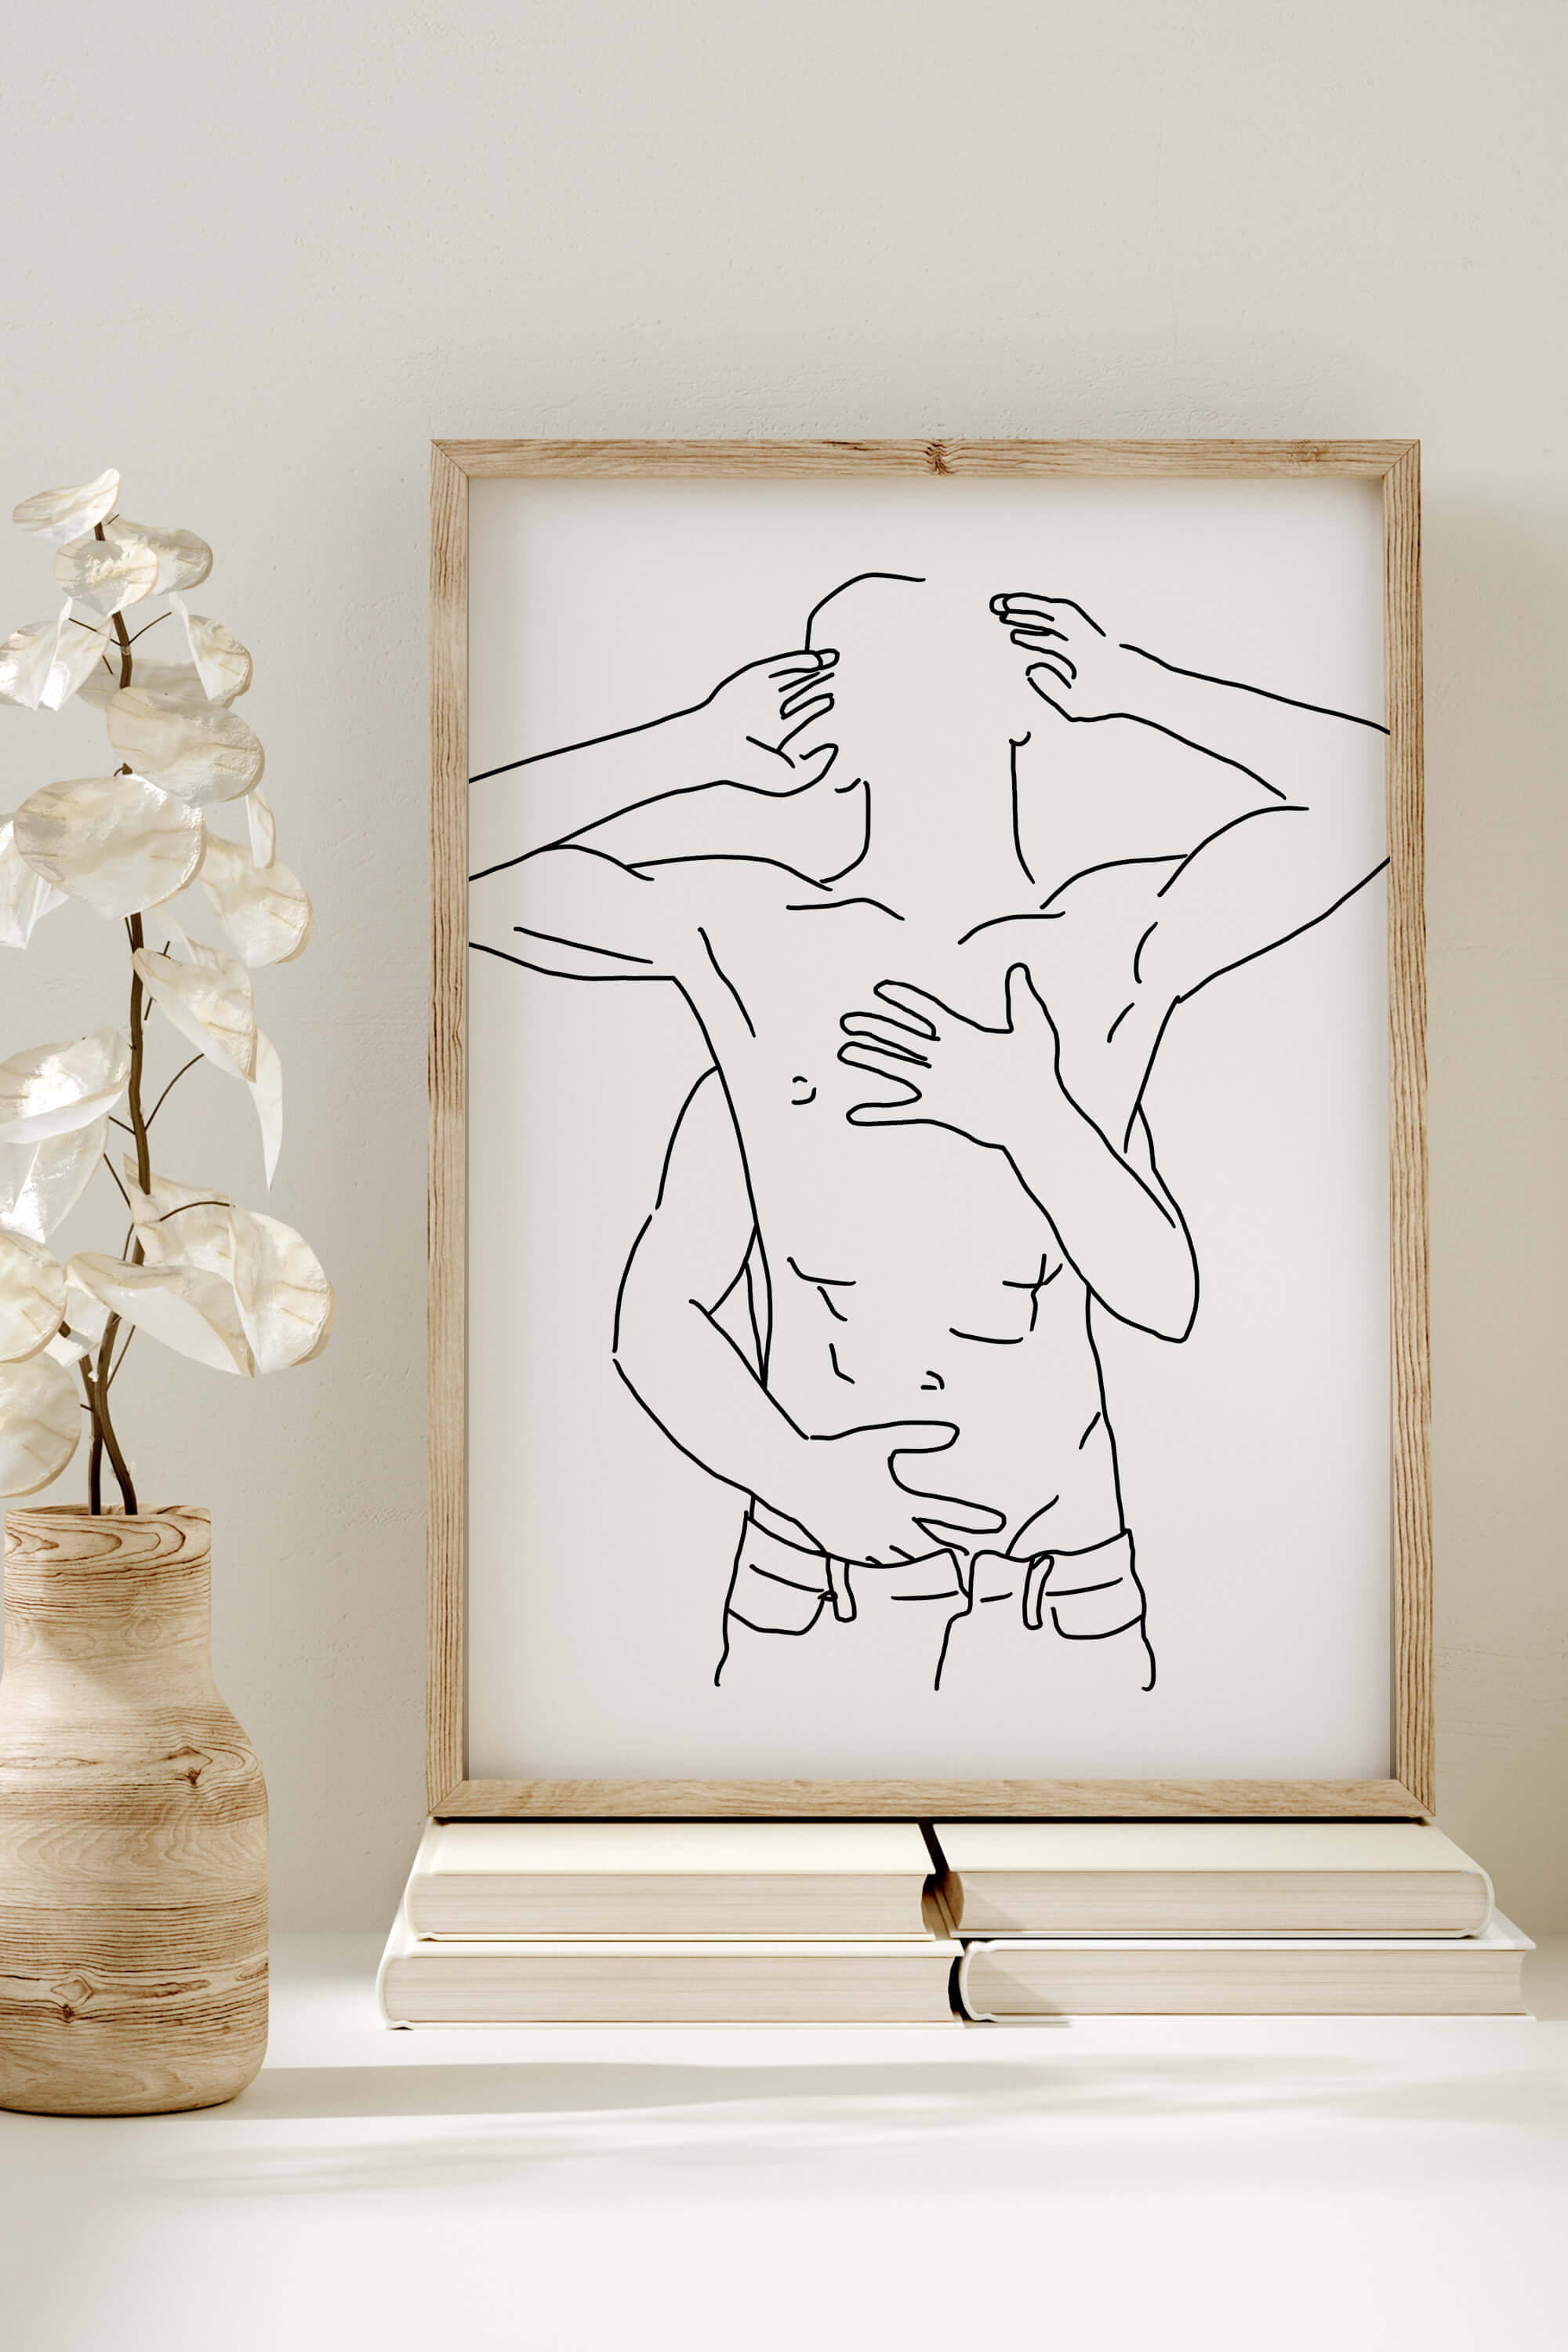 Male couple line art in monochrome, showcasing the beauty of love and devotion. This art print enhances living spaces with its minimalist yet powerful depiction of passion and connection.